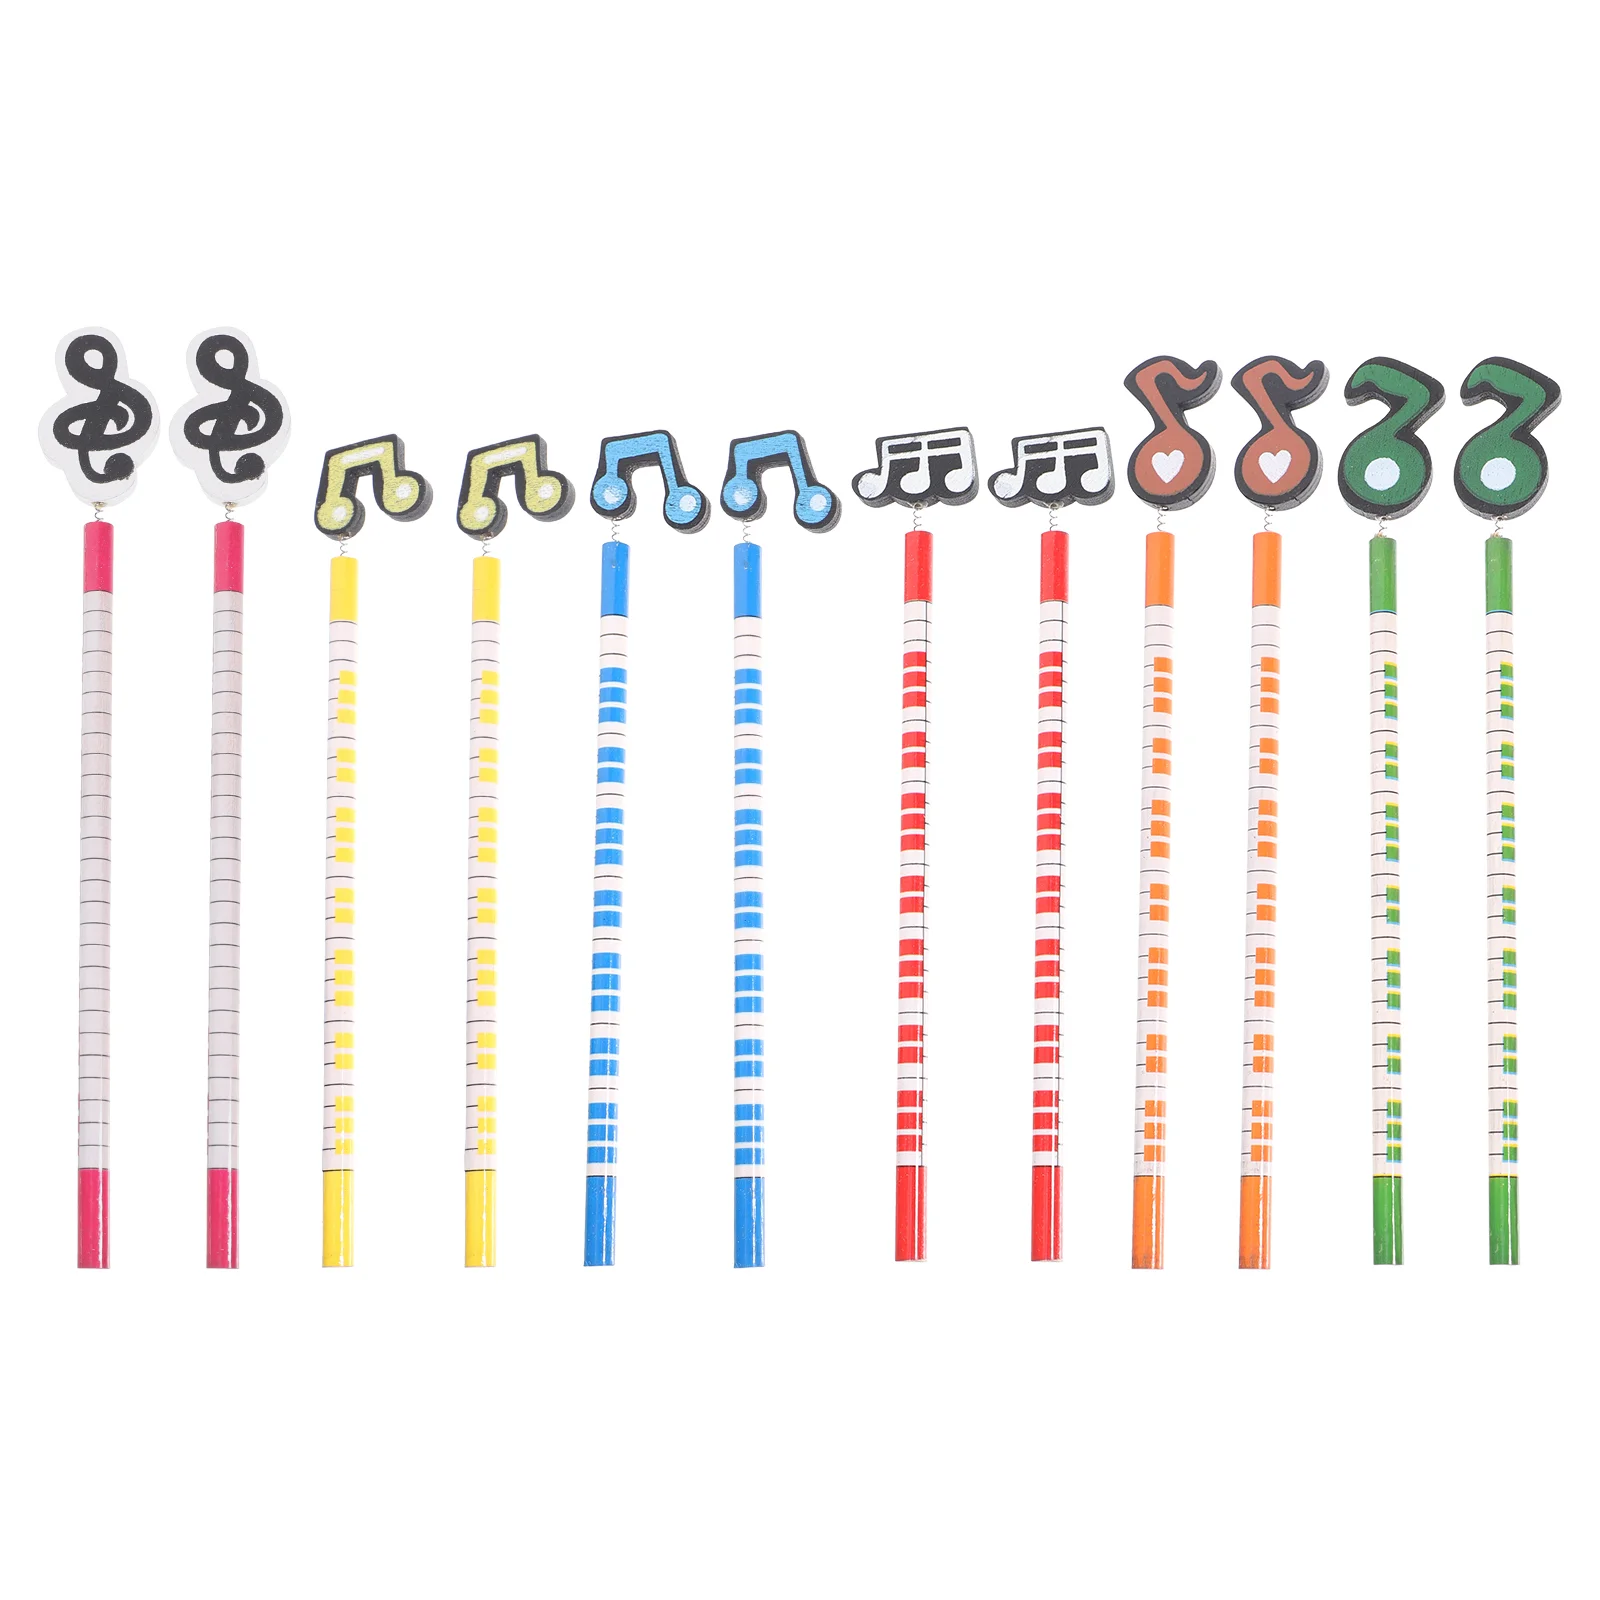 

Musical Note Pencils Music Theme Wooden Pencils for Artists Kids Students